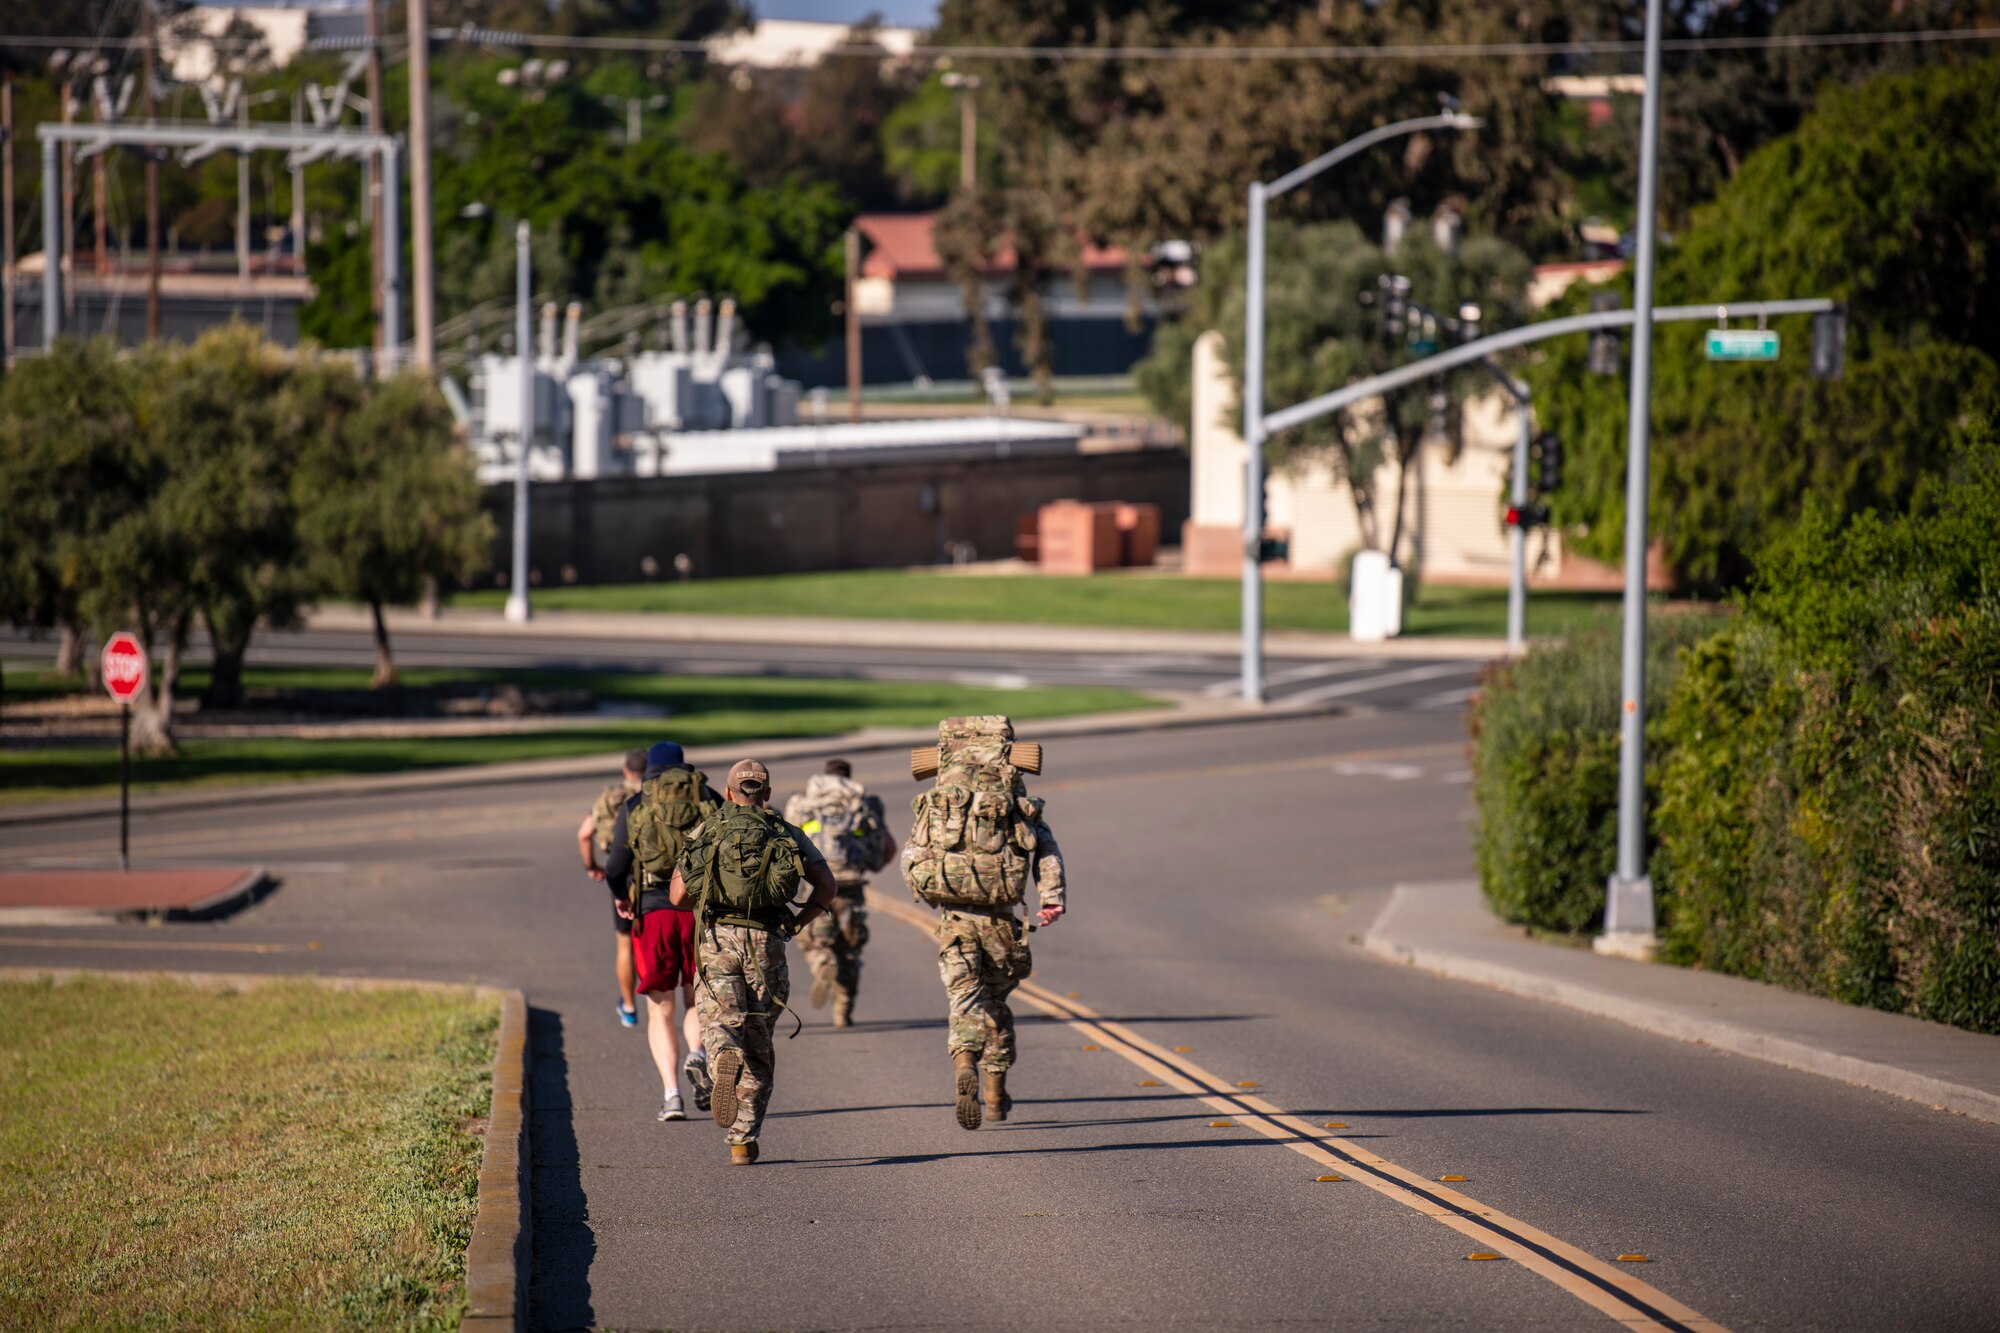 Service members are seen running down a road all wearing large ruck sacks on their backs.